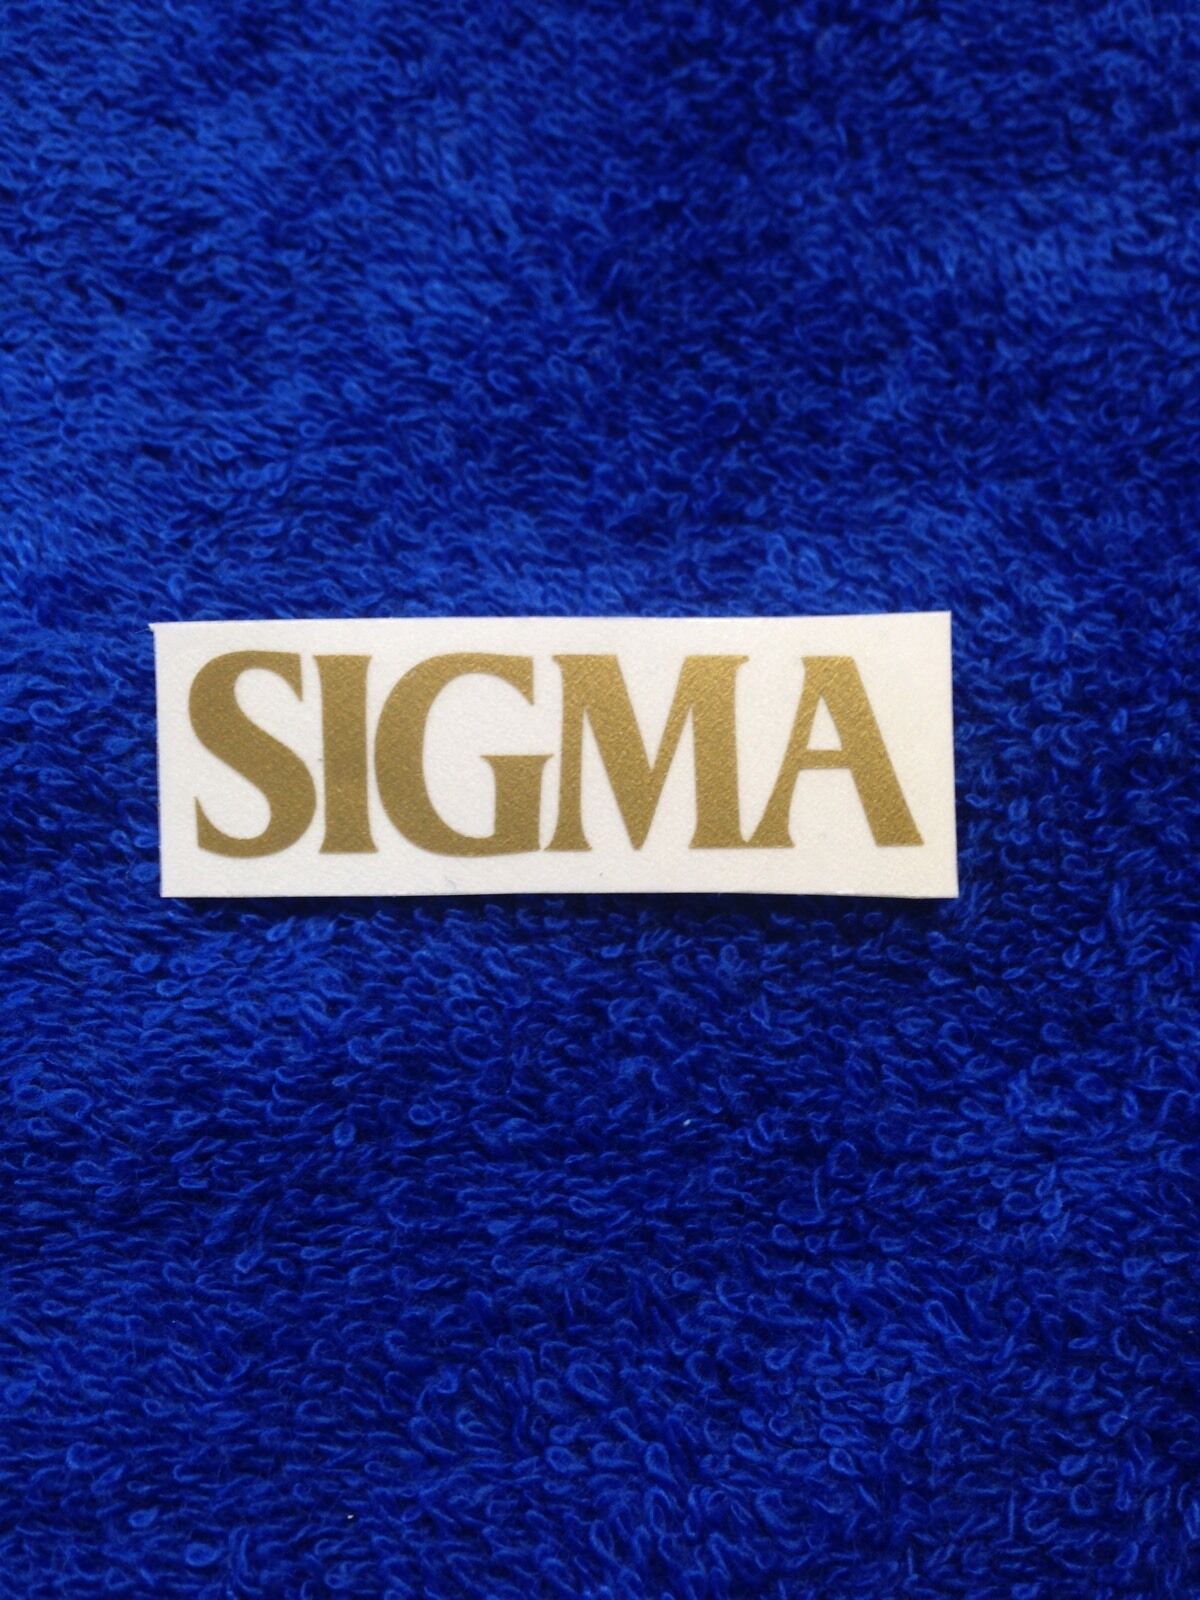 SIGMA Guitar Headstock Decal Sticker Repair Acoustic Martin Vintage Neck Project